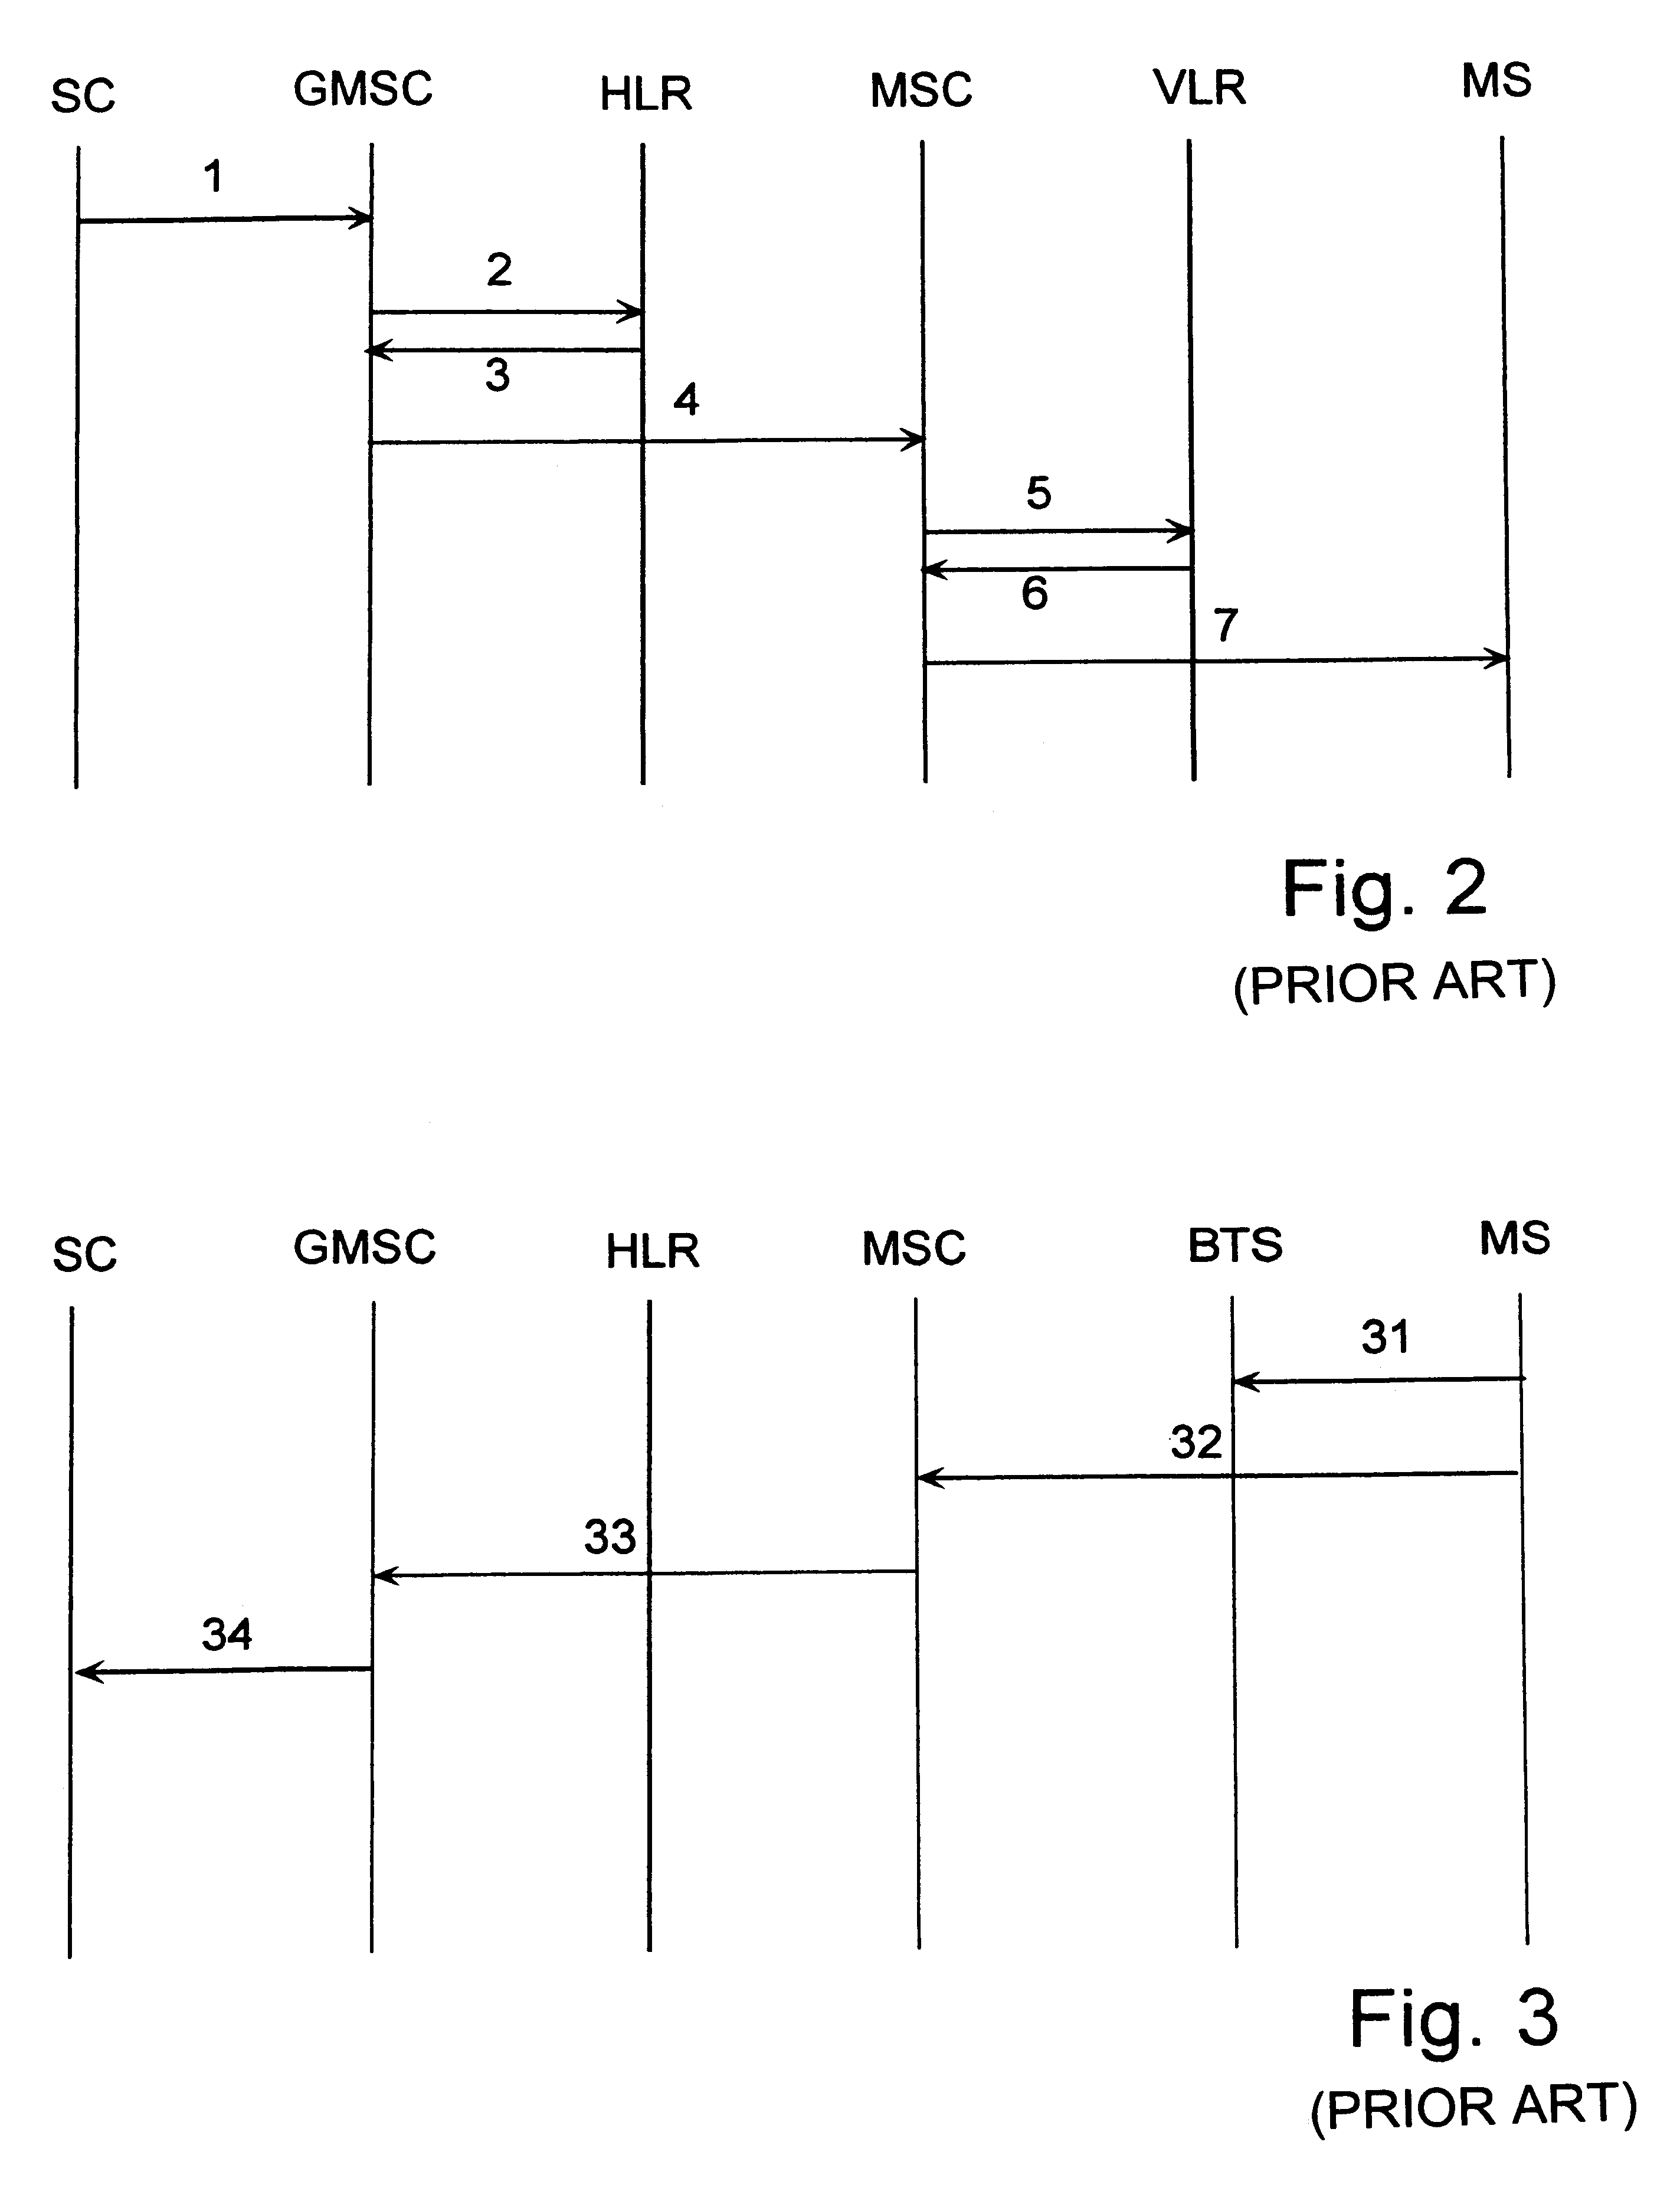 Location-dependent services in a mobile communication system